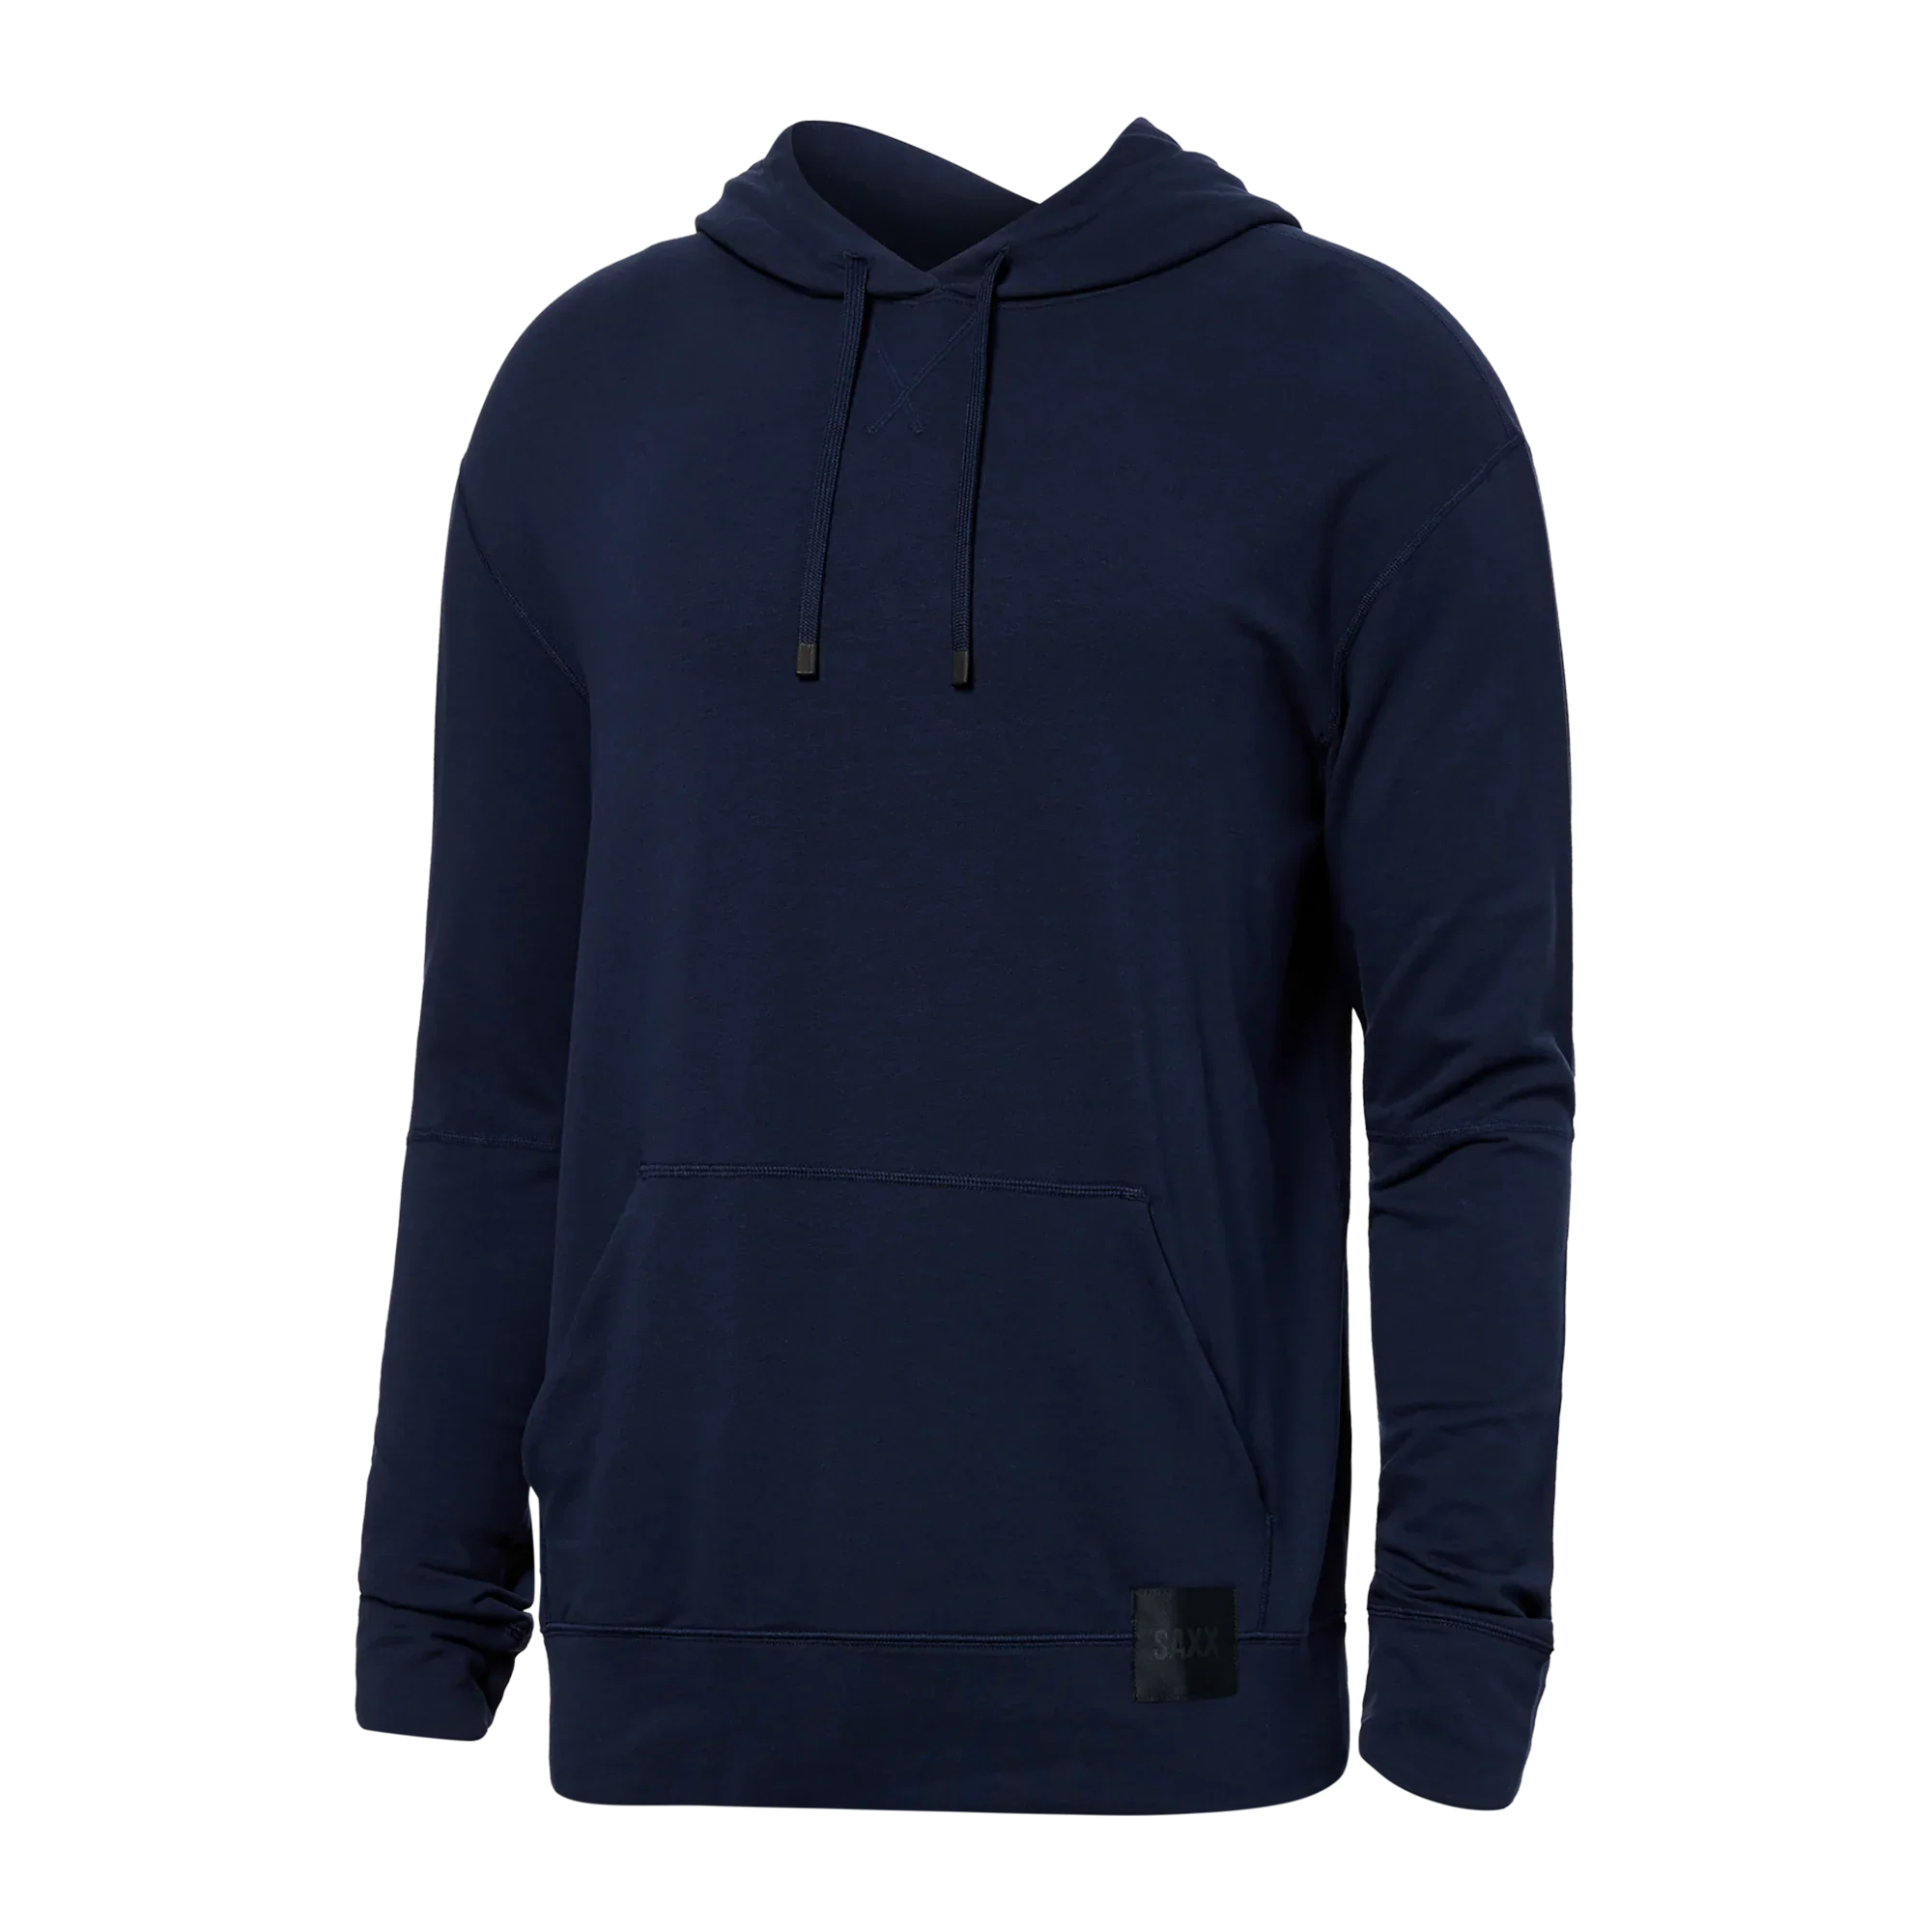 'SAXX 3Six Five Hoodie' in 'Navy' colour